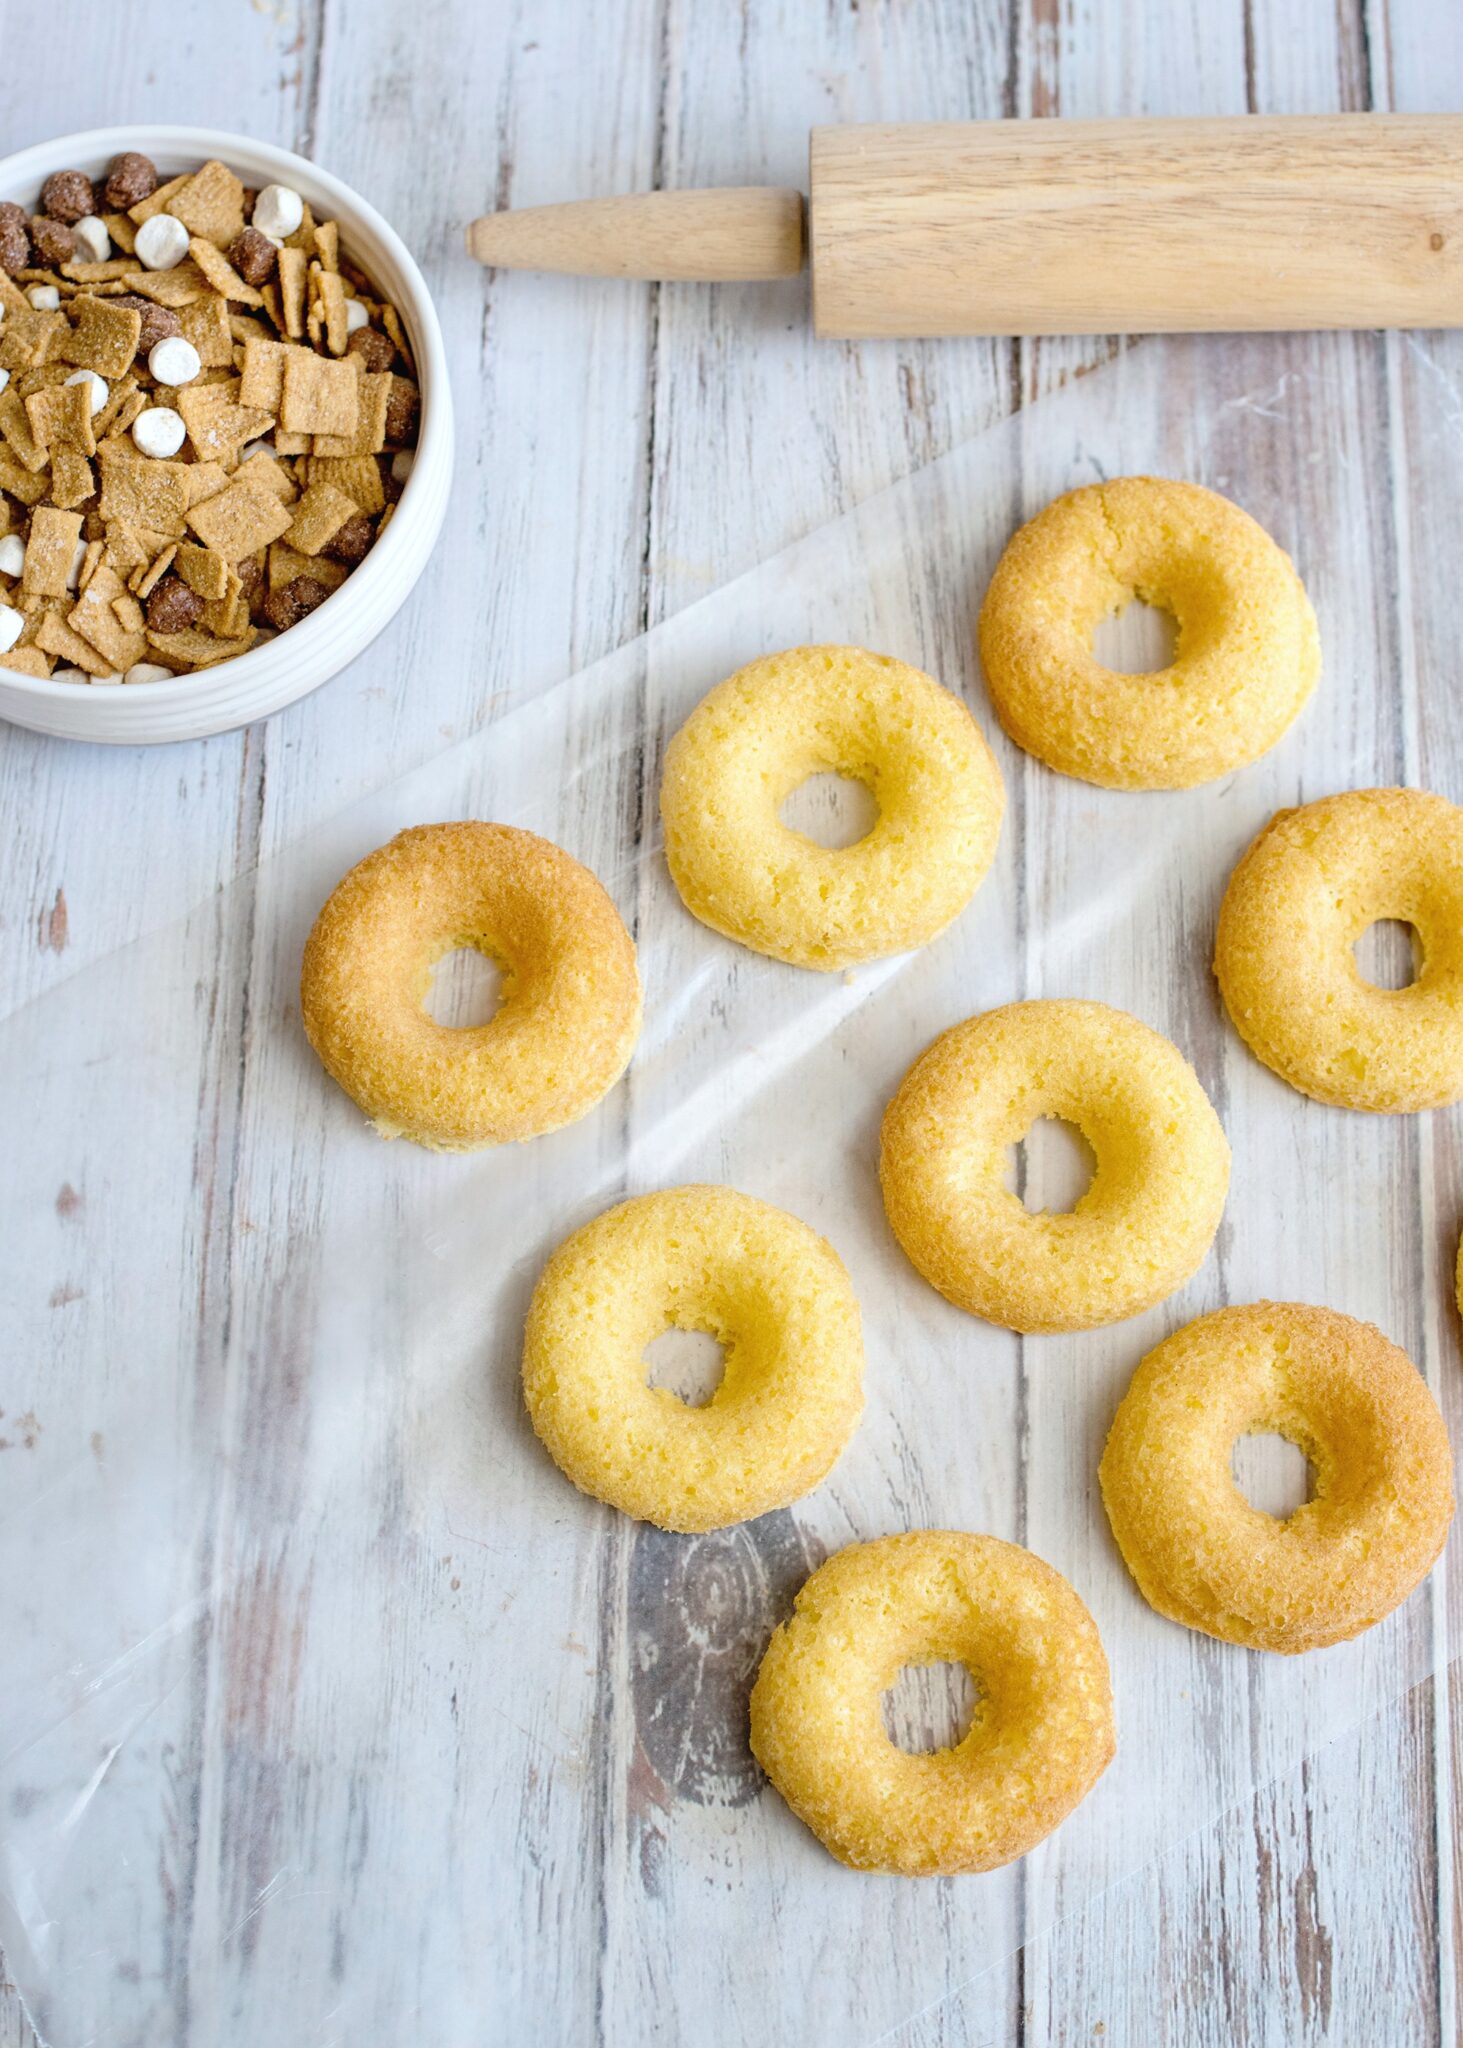 Baked donuts cooling on parchment paper. A rolling pin and bowl of cereal is shown.